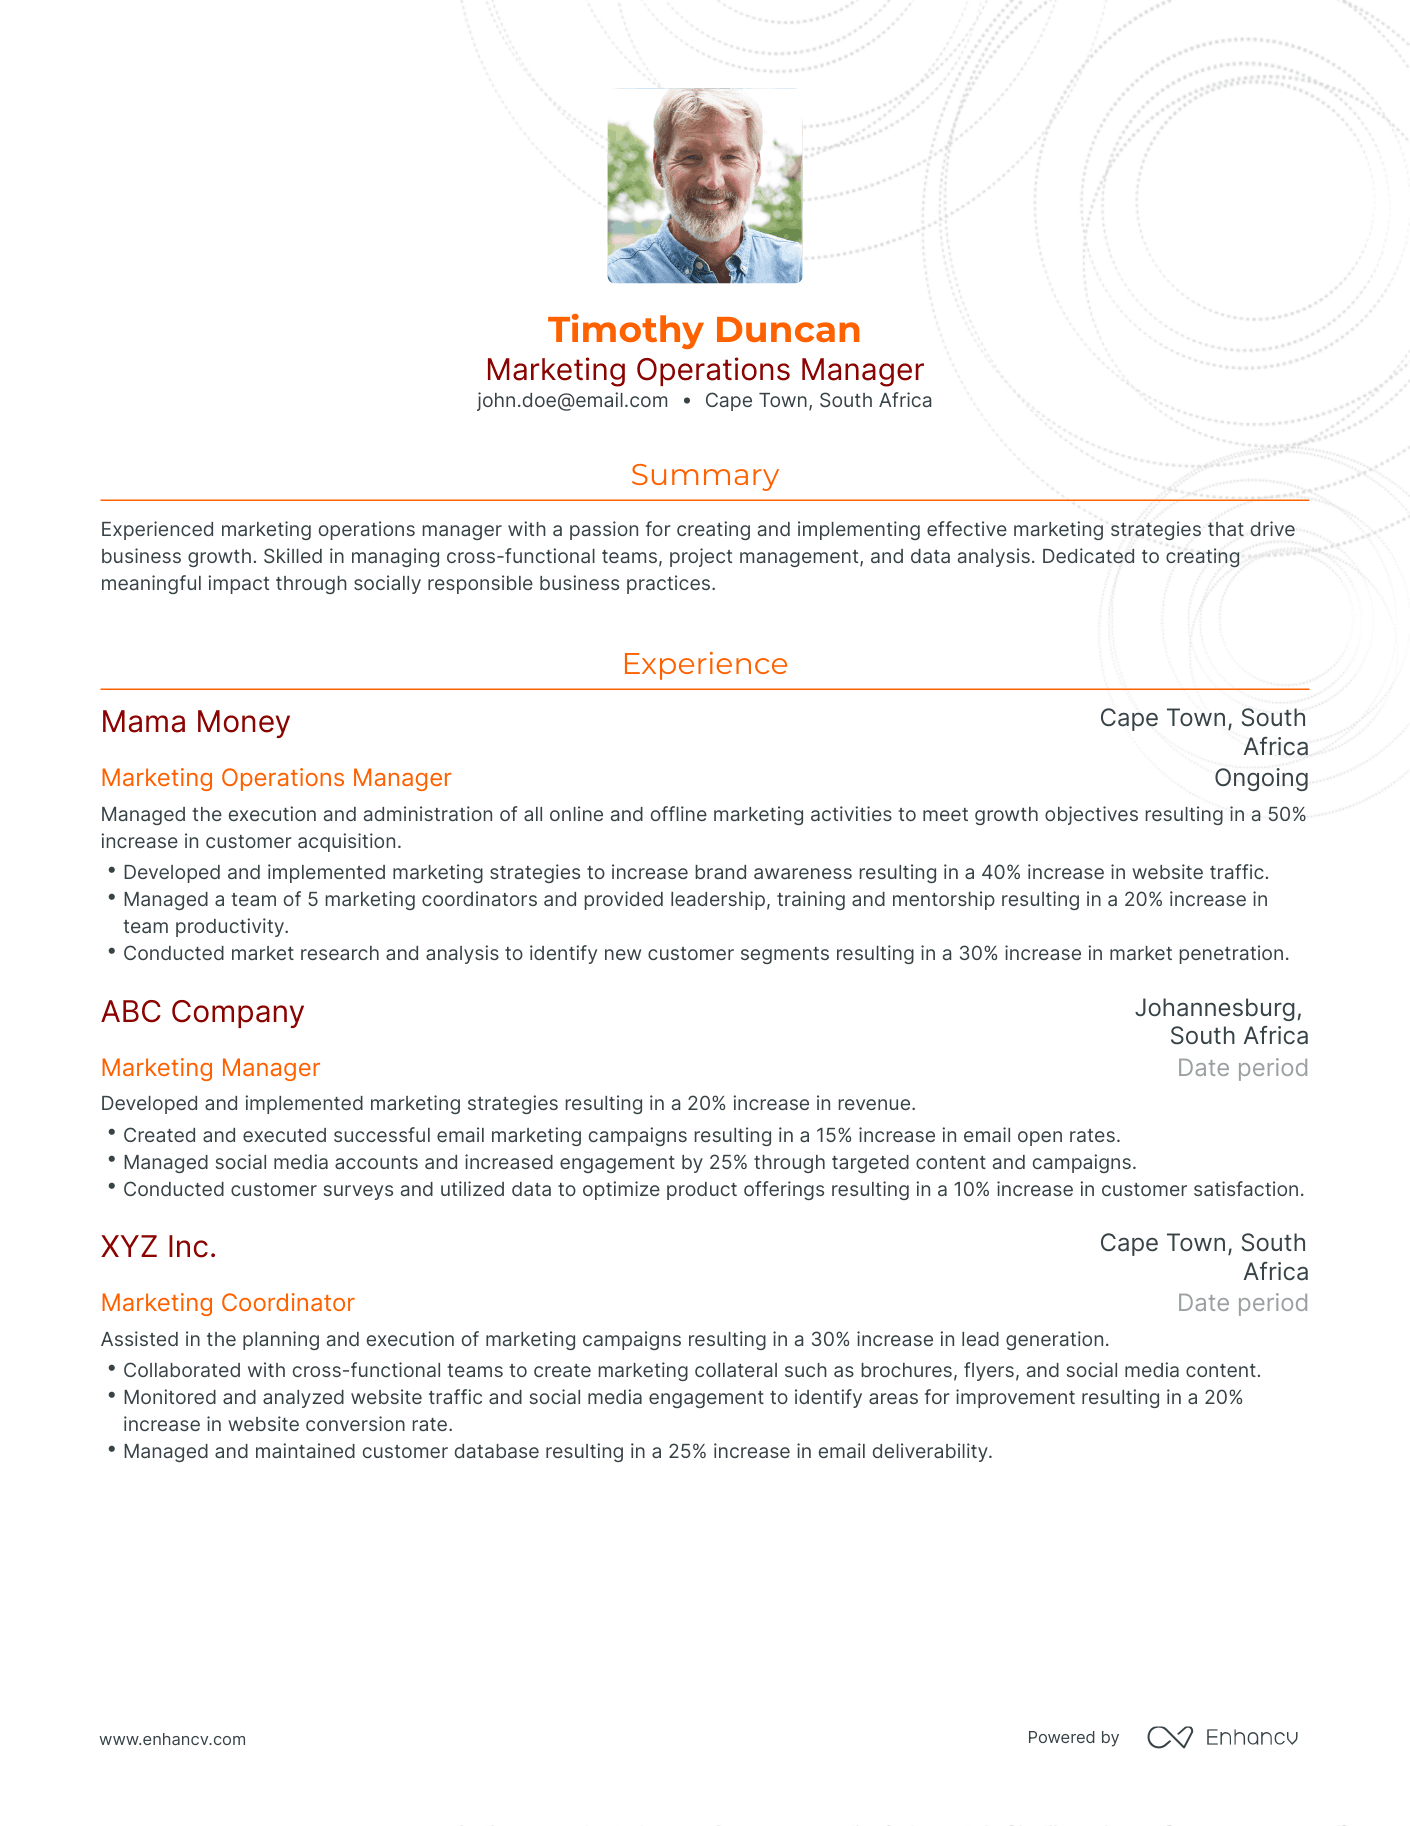 Traditional Marketing Operations Manager Resume Template